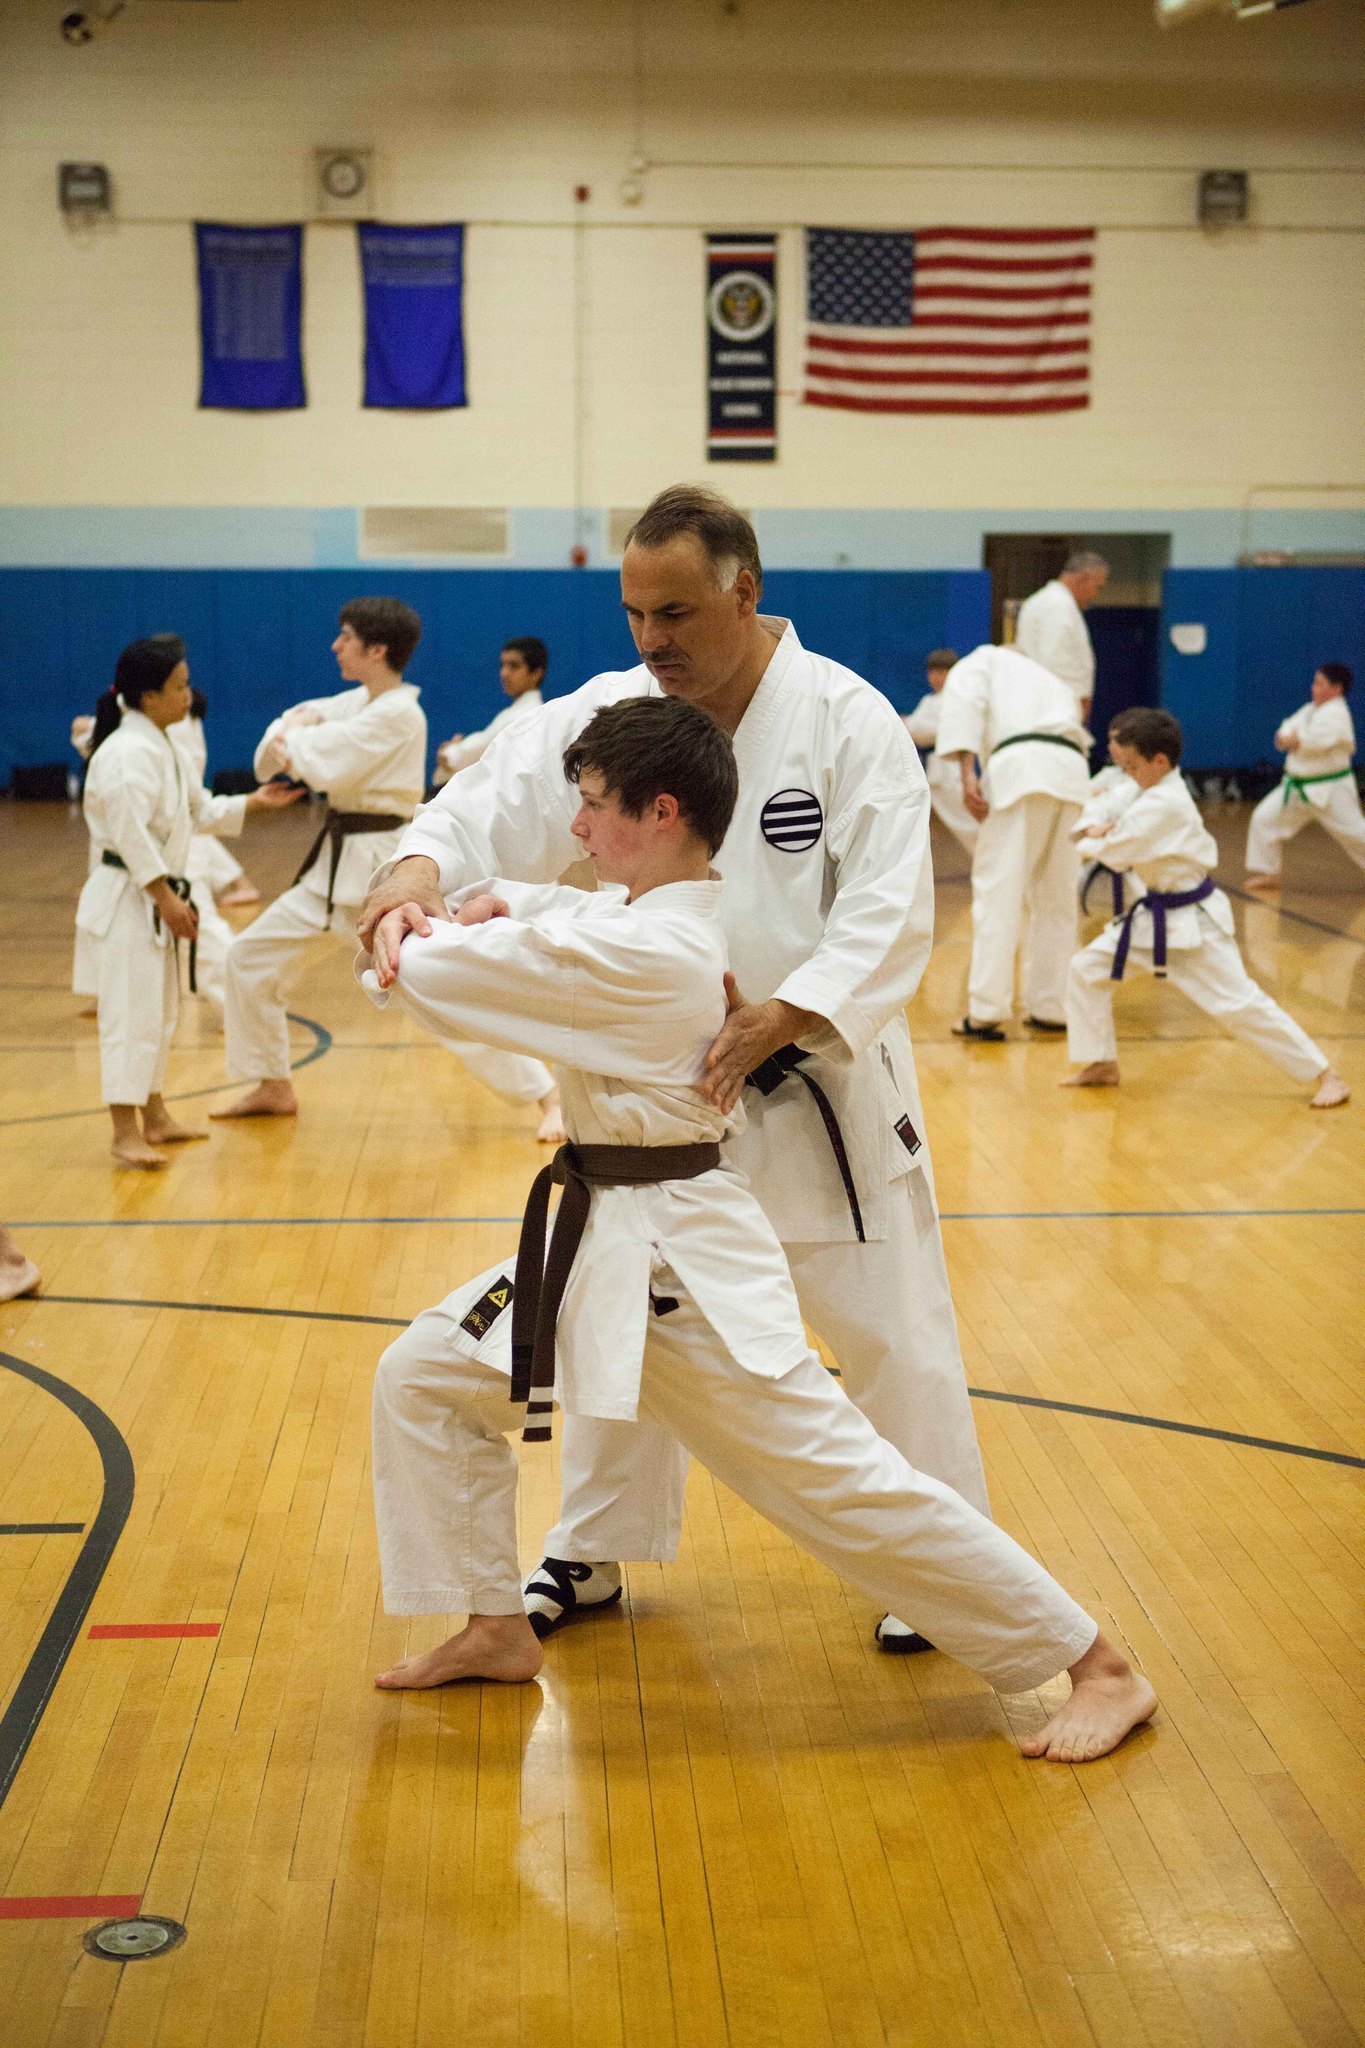 Karate Classes for All Ages - Chicago Tribune